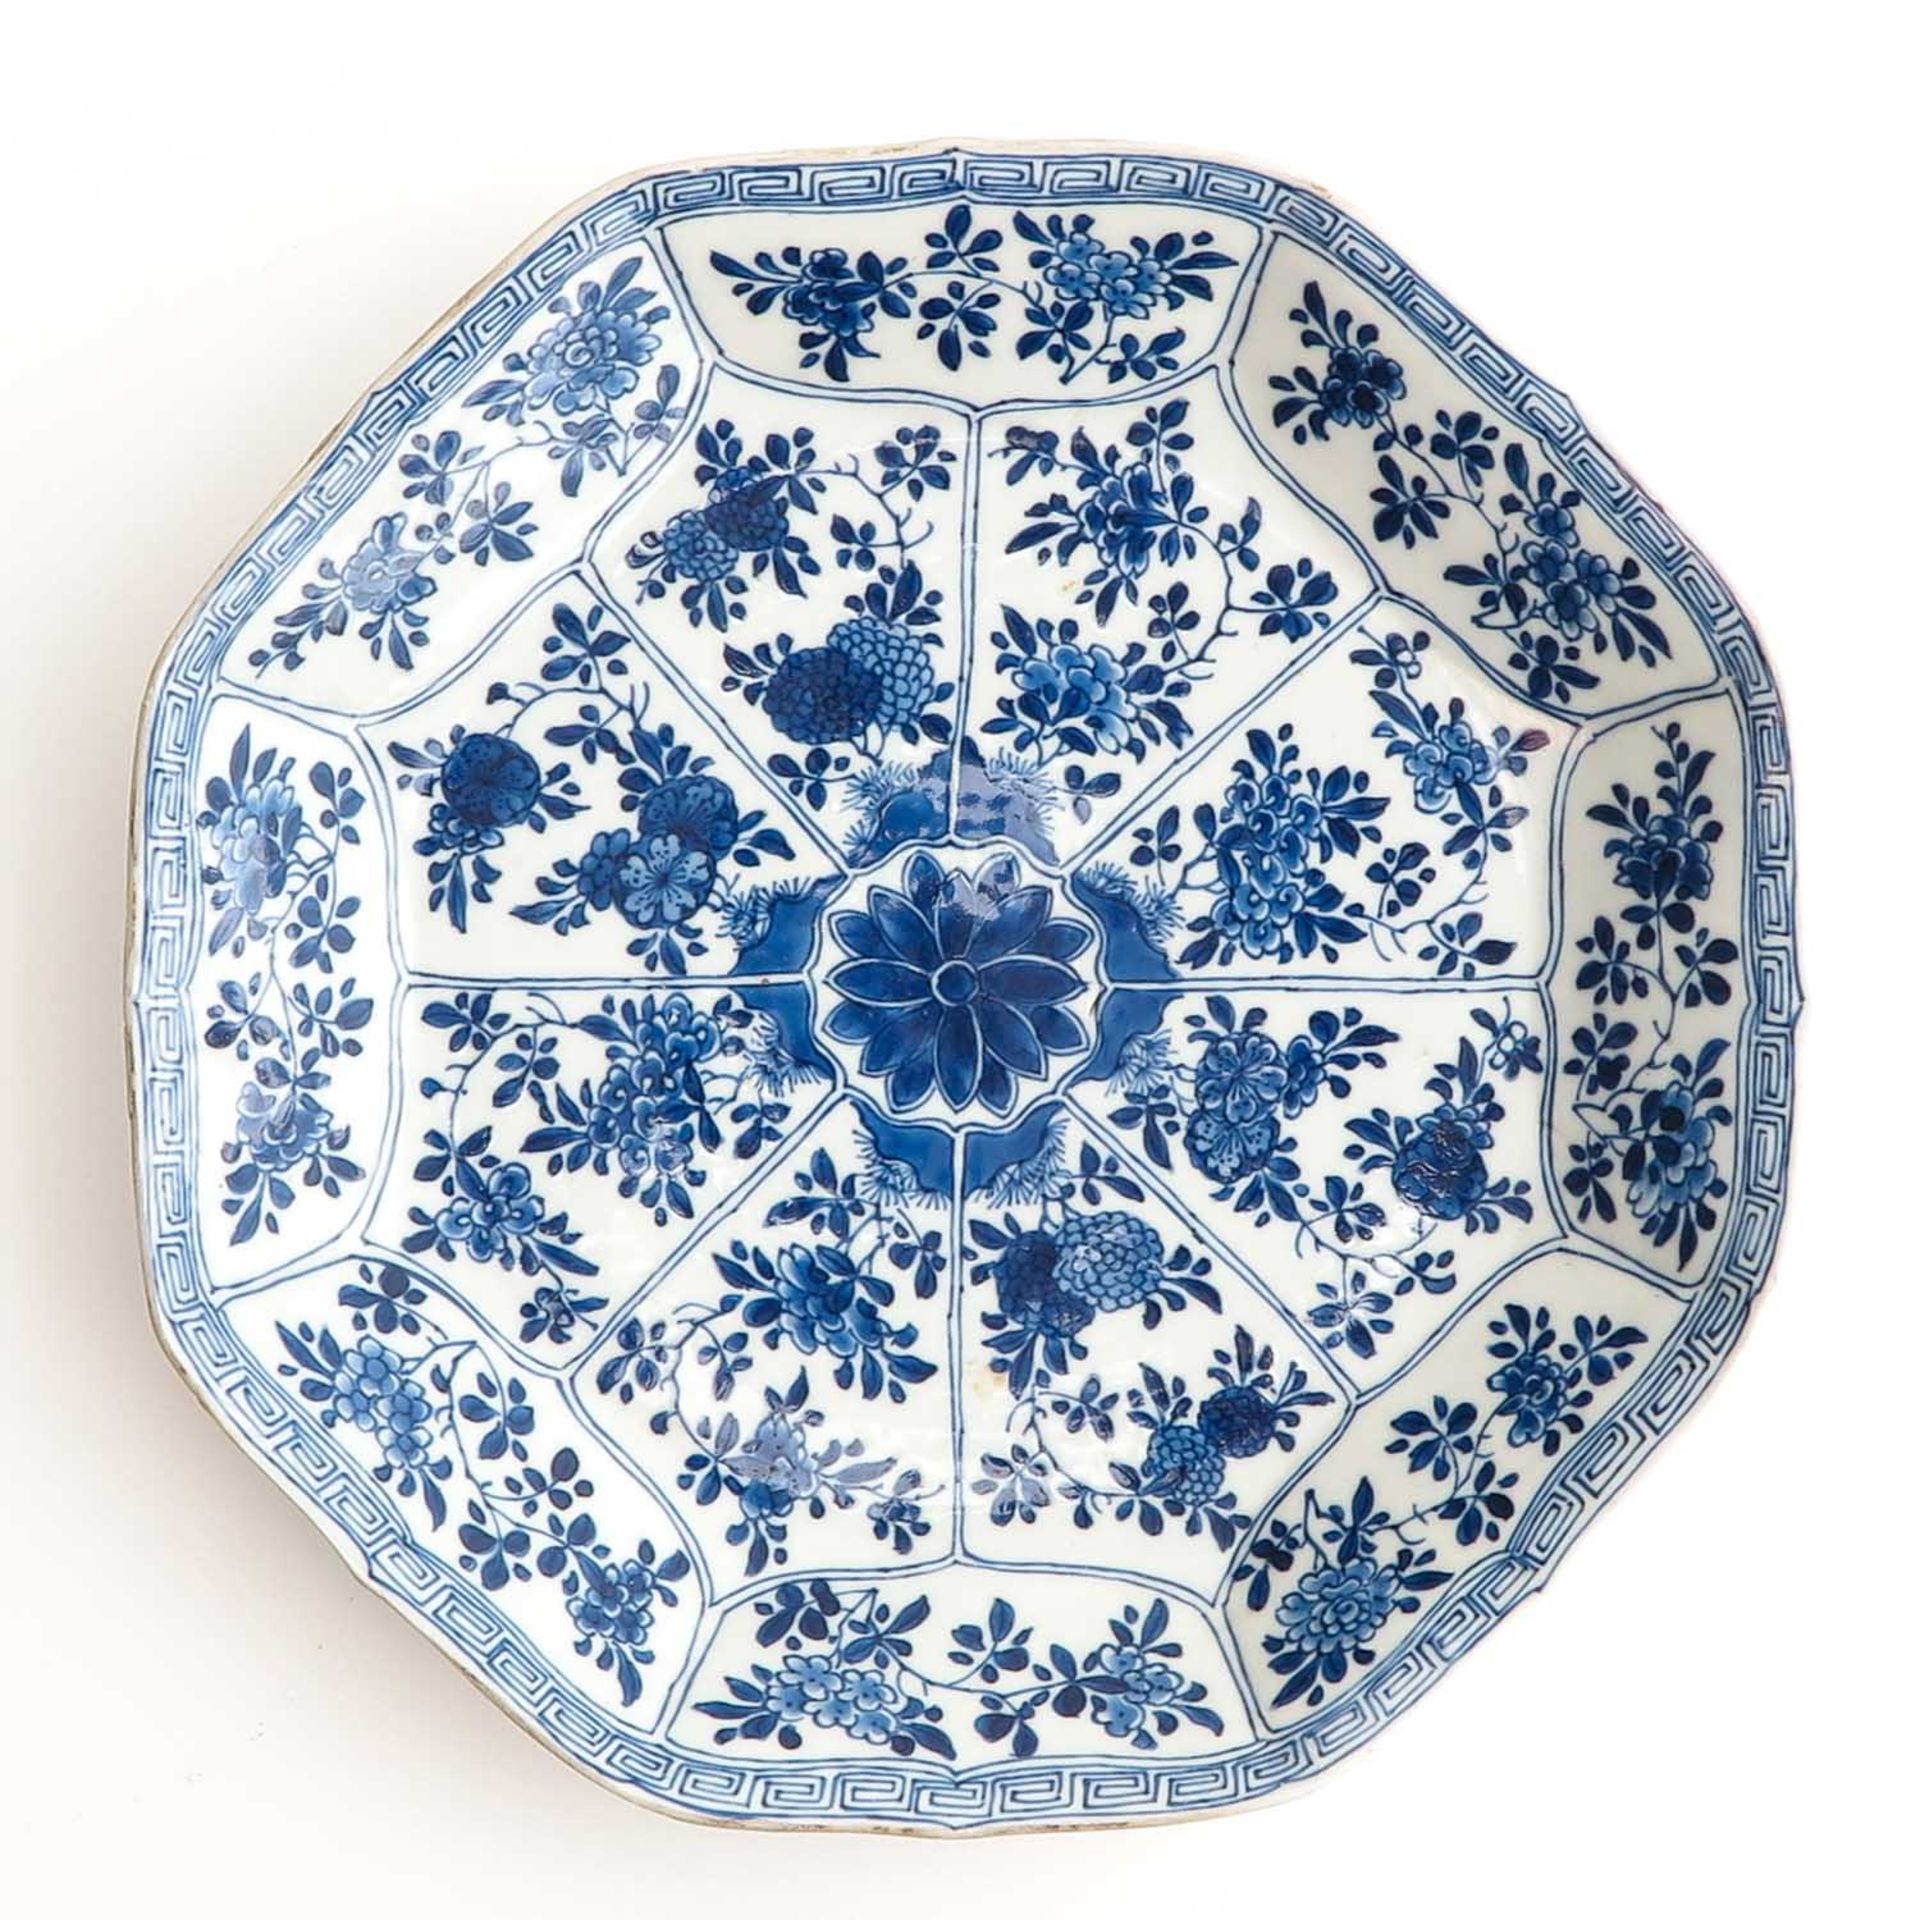 Two Blue and White Plates - Image 5 of 10